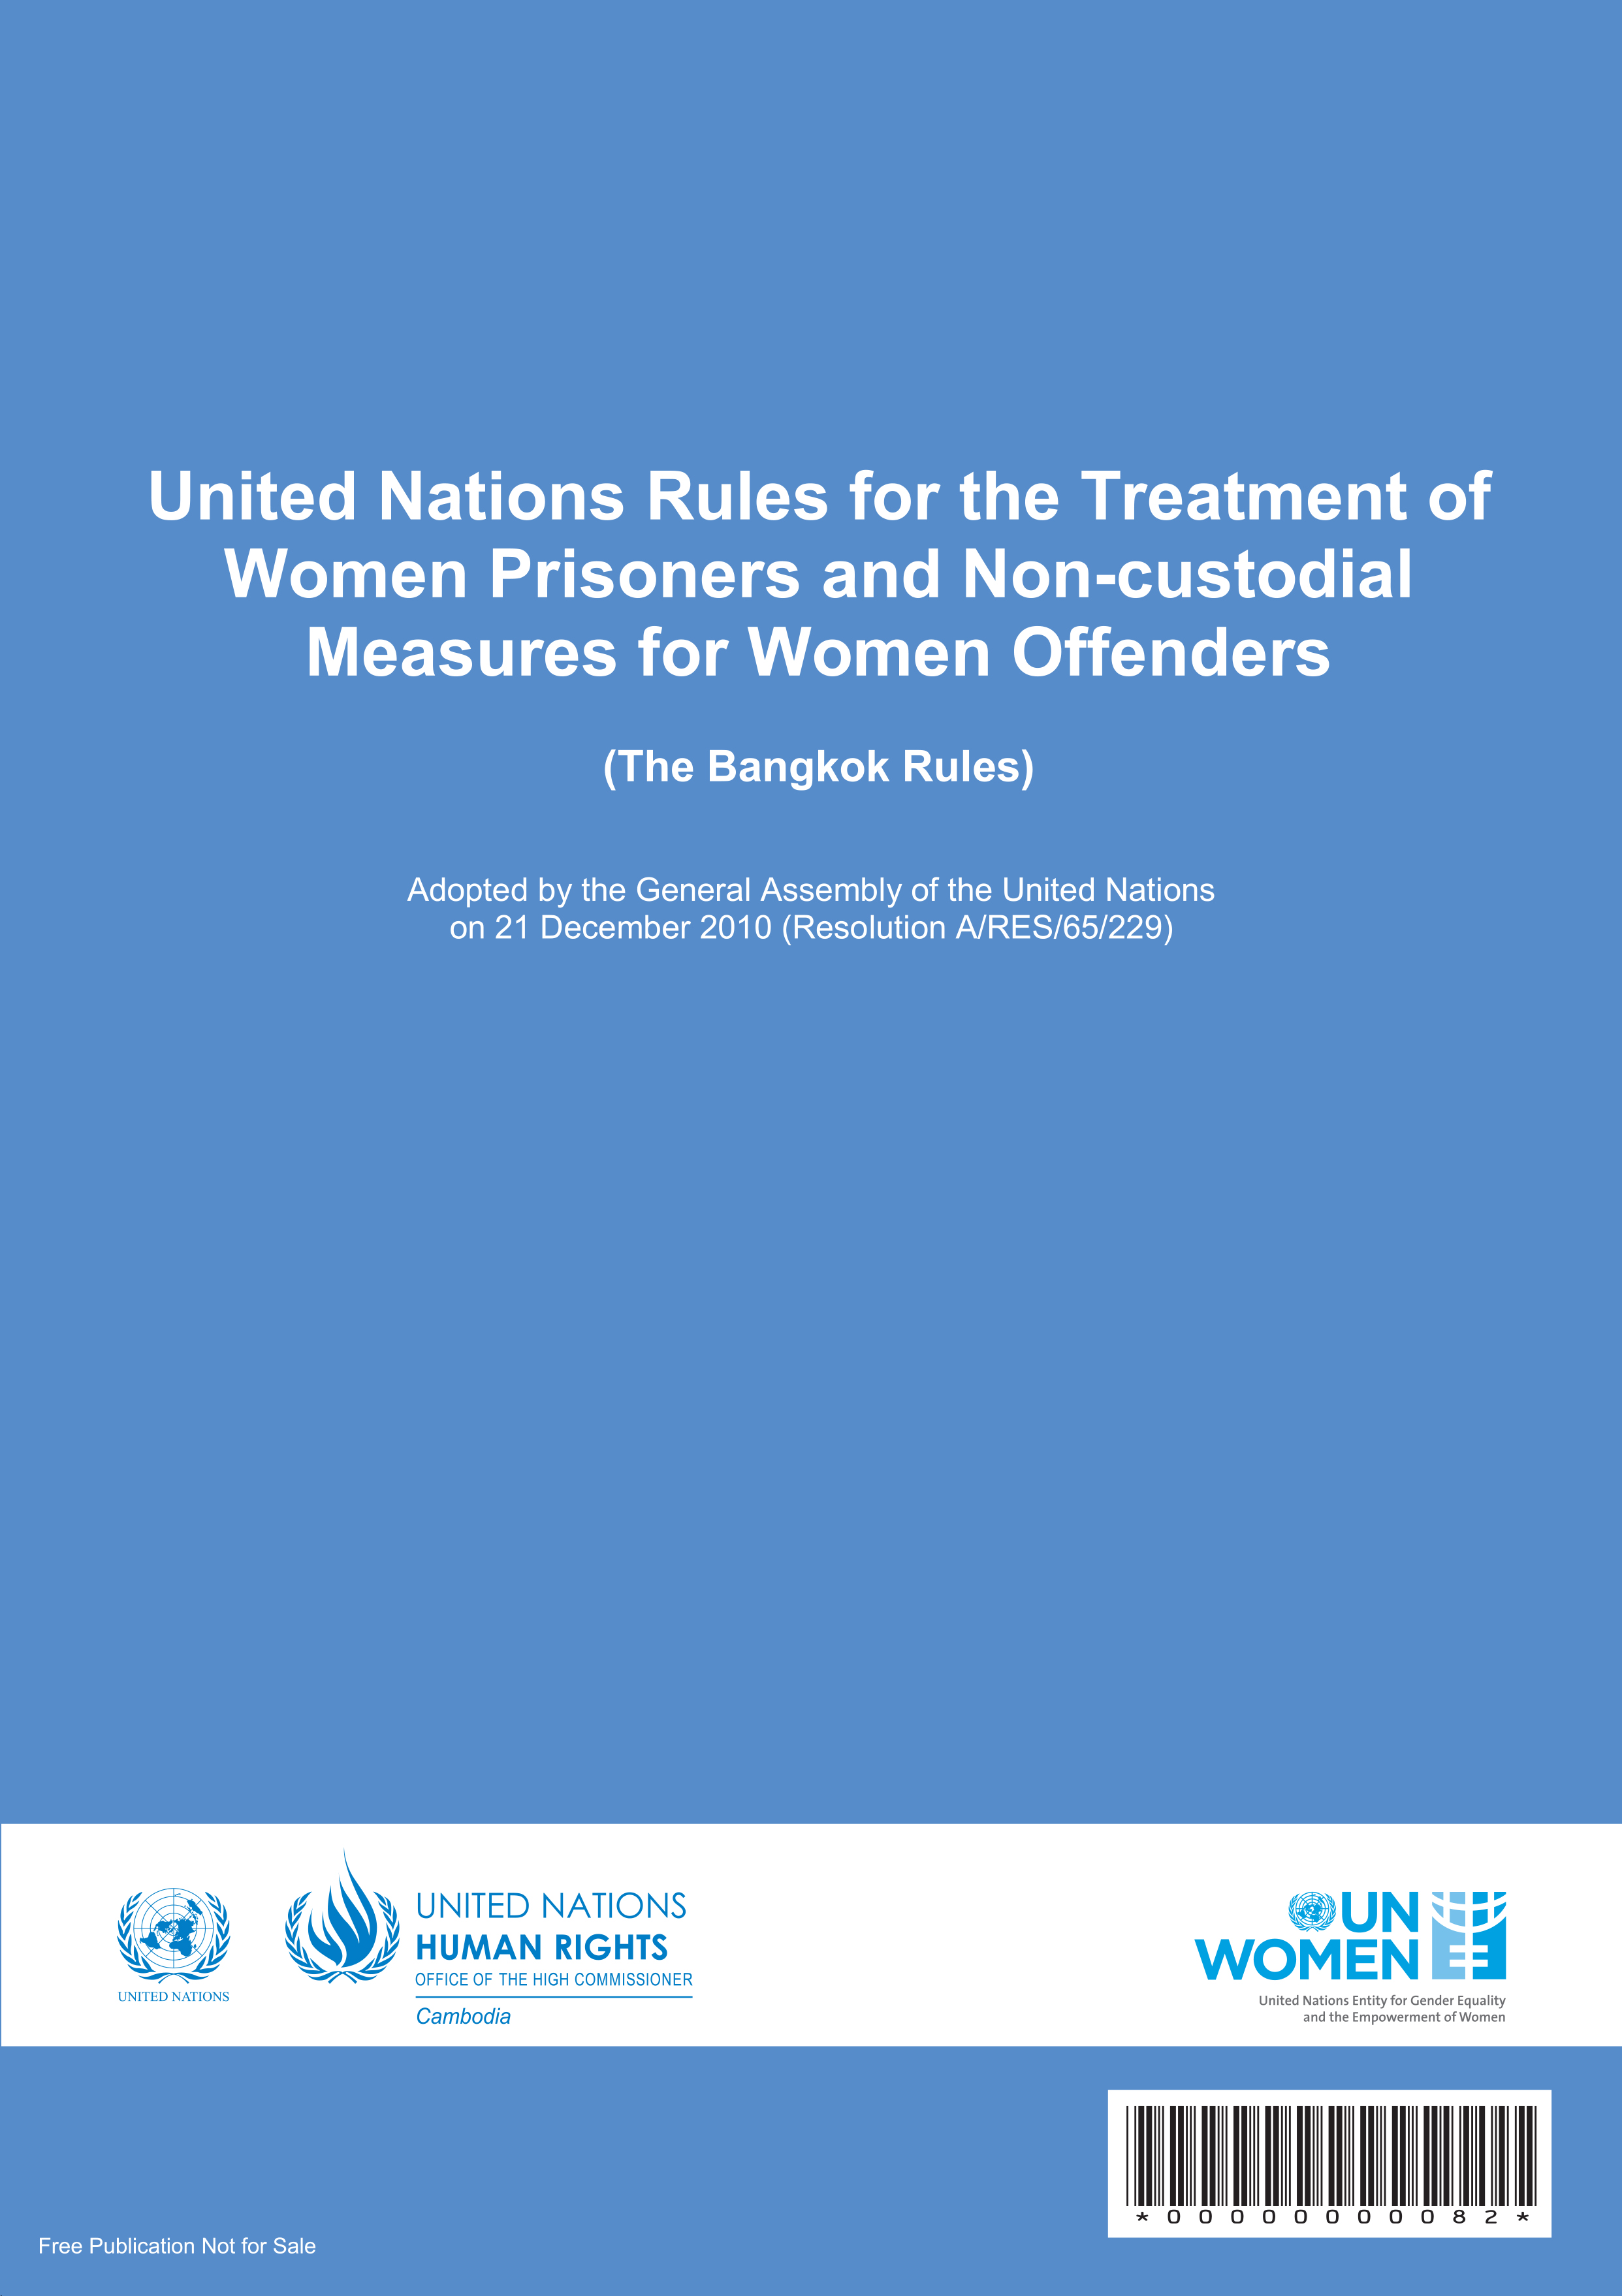 United Nations Rules for the Treatment of Women Prisoners and Non-custodial Measures for Women Offenders (the Bangkok Rules)